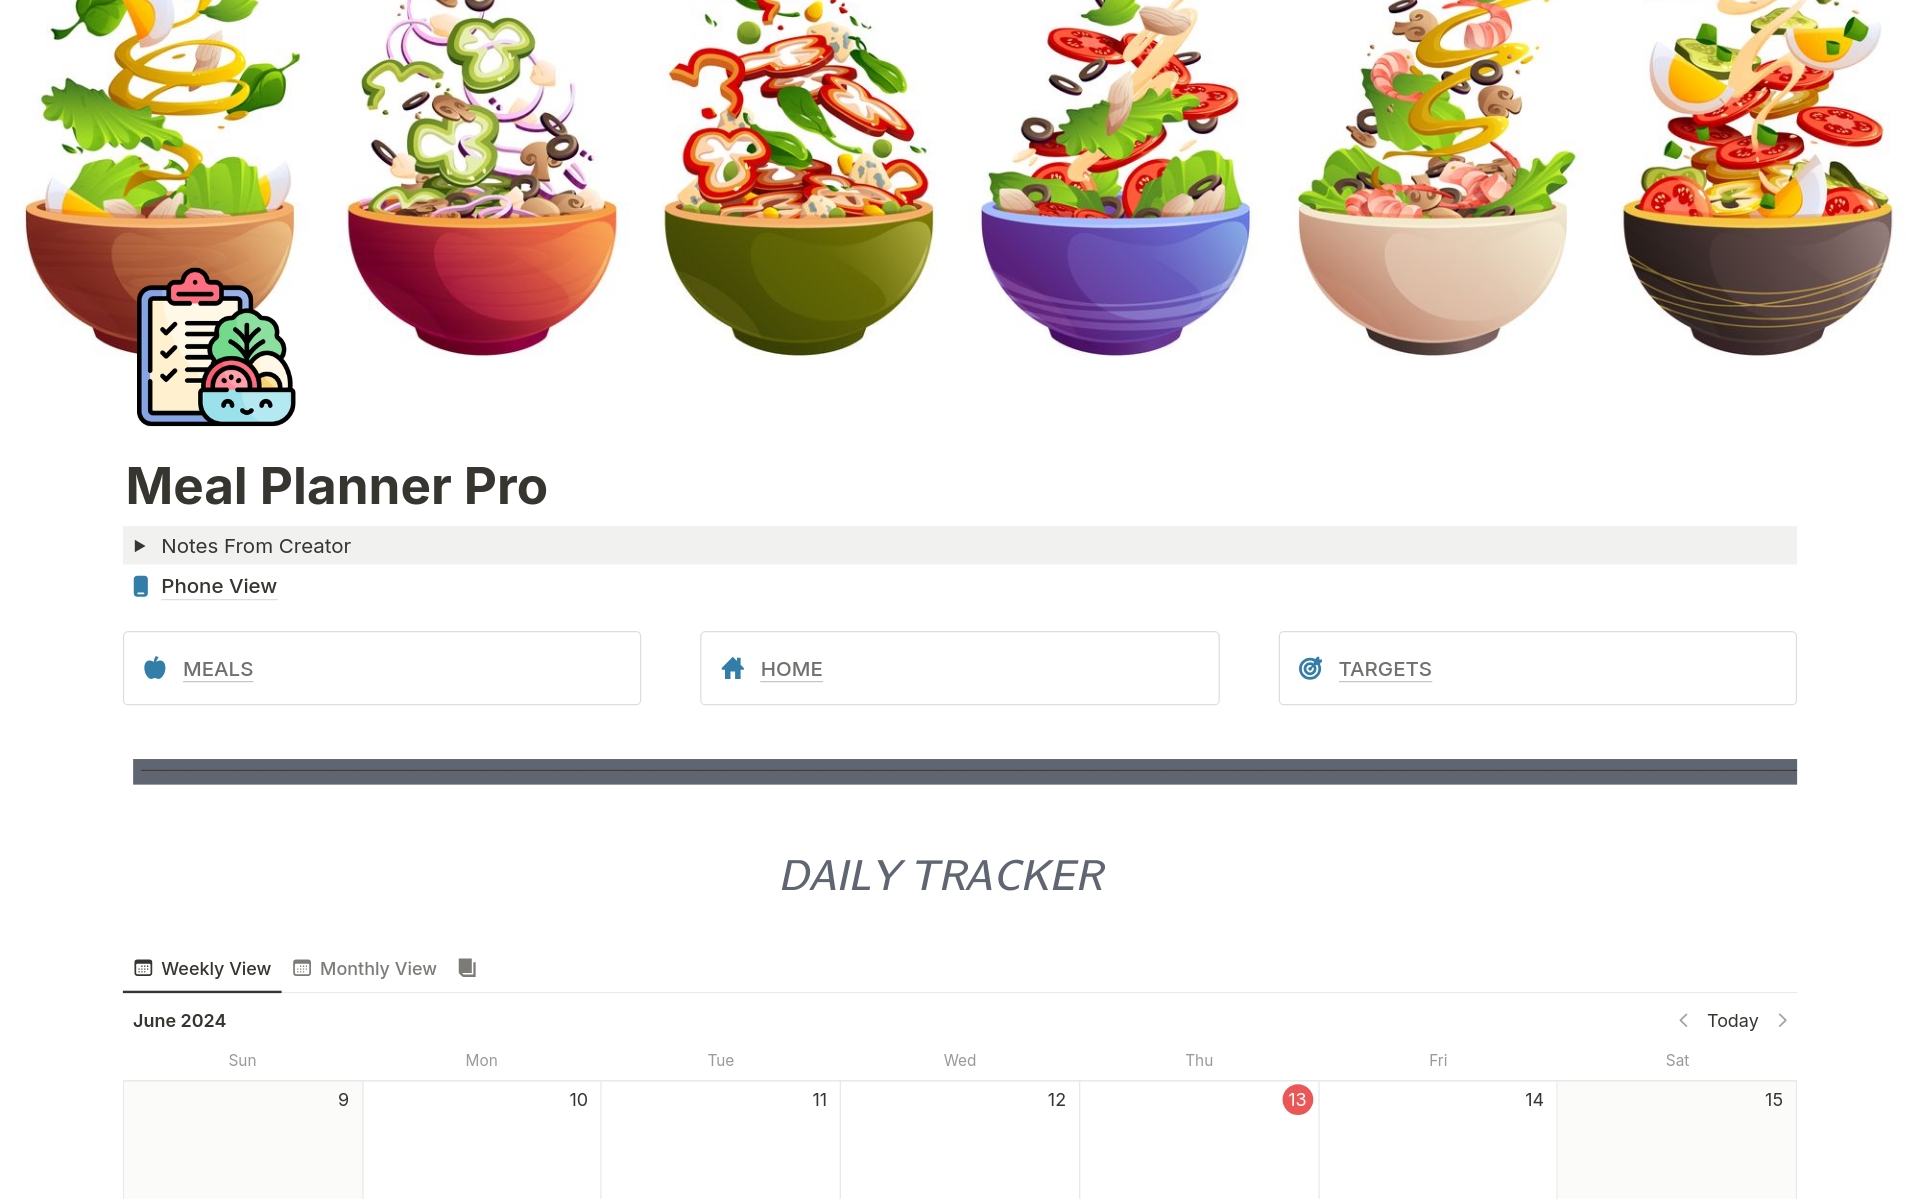 Notion Meal Planner Pro template. Create a database full of meals and be able to track their calories and macro levels. Set your calorie, protein, carbs & fats targets and be able to see what meals align with your goals. Take control of your nutrition and health today.

